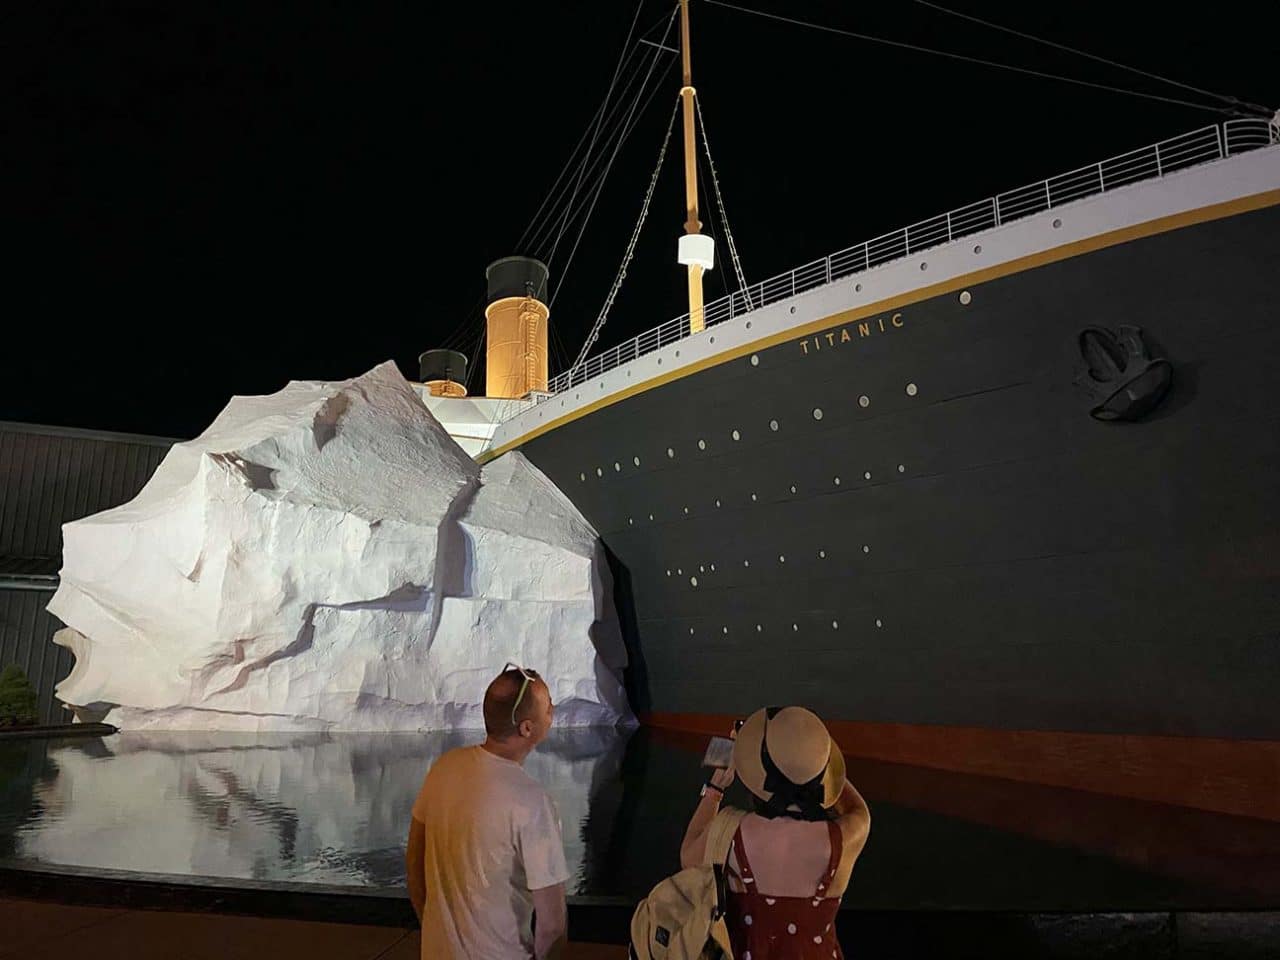 The Titanic Museum Attraction features an (almost) life-size replica of the doomed ship's bow.